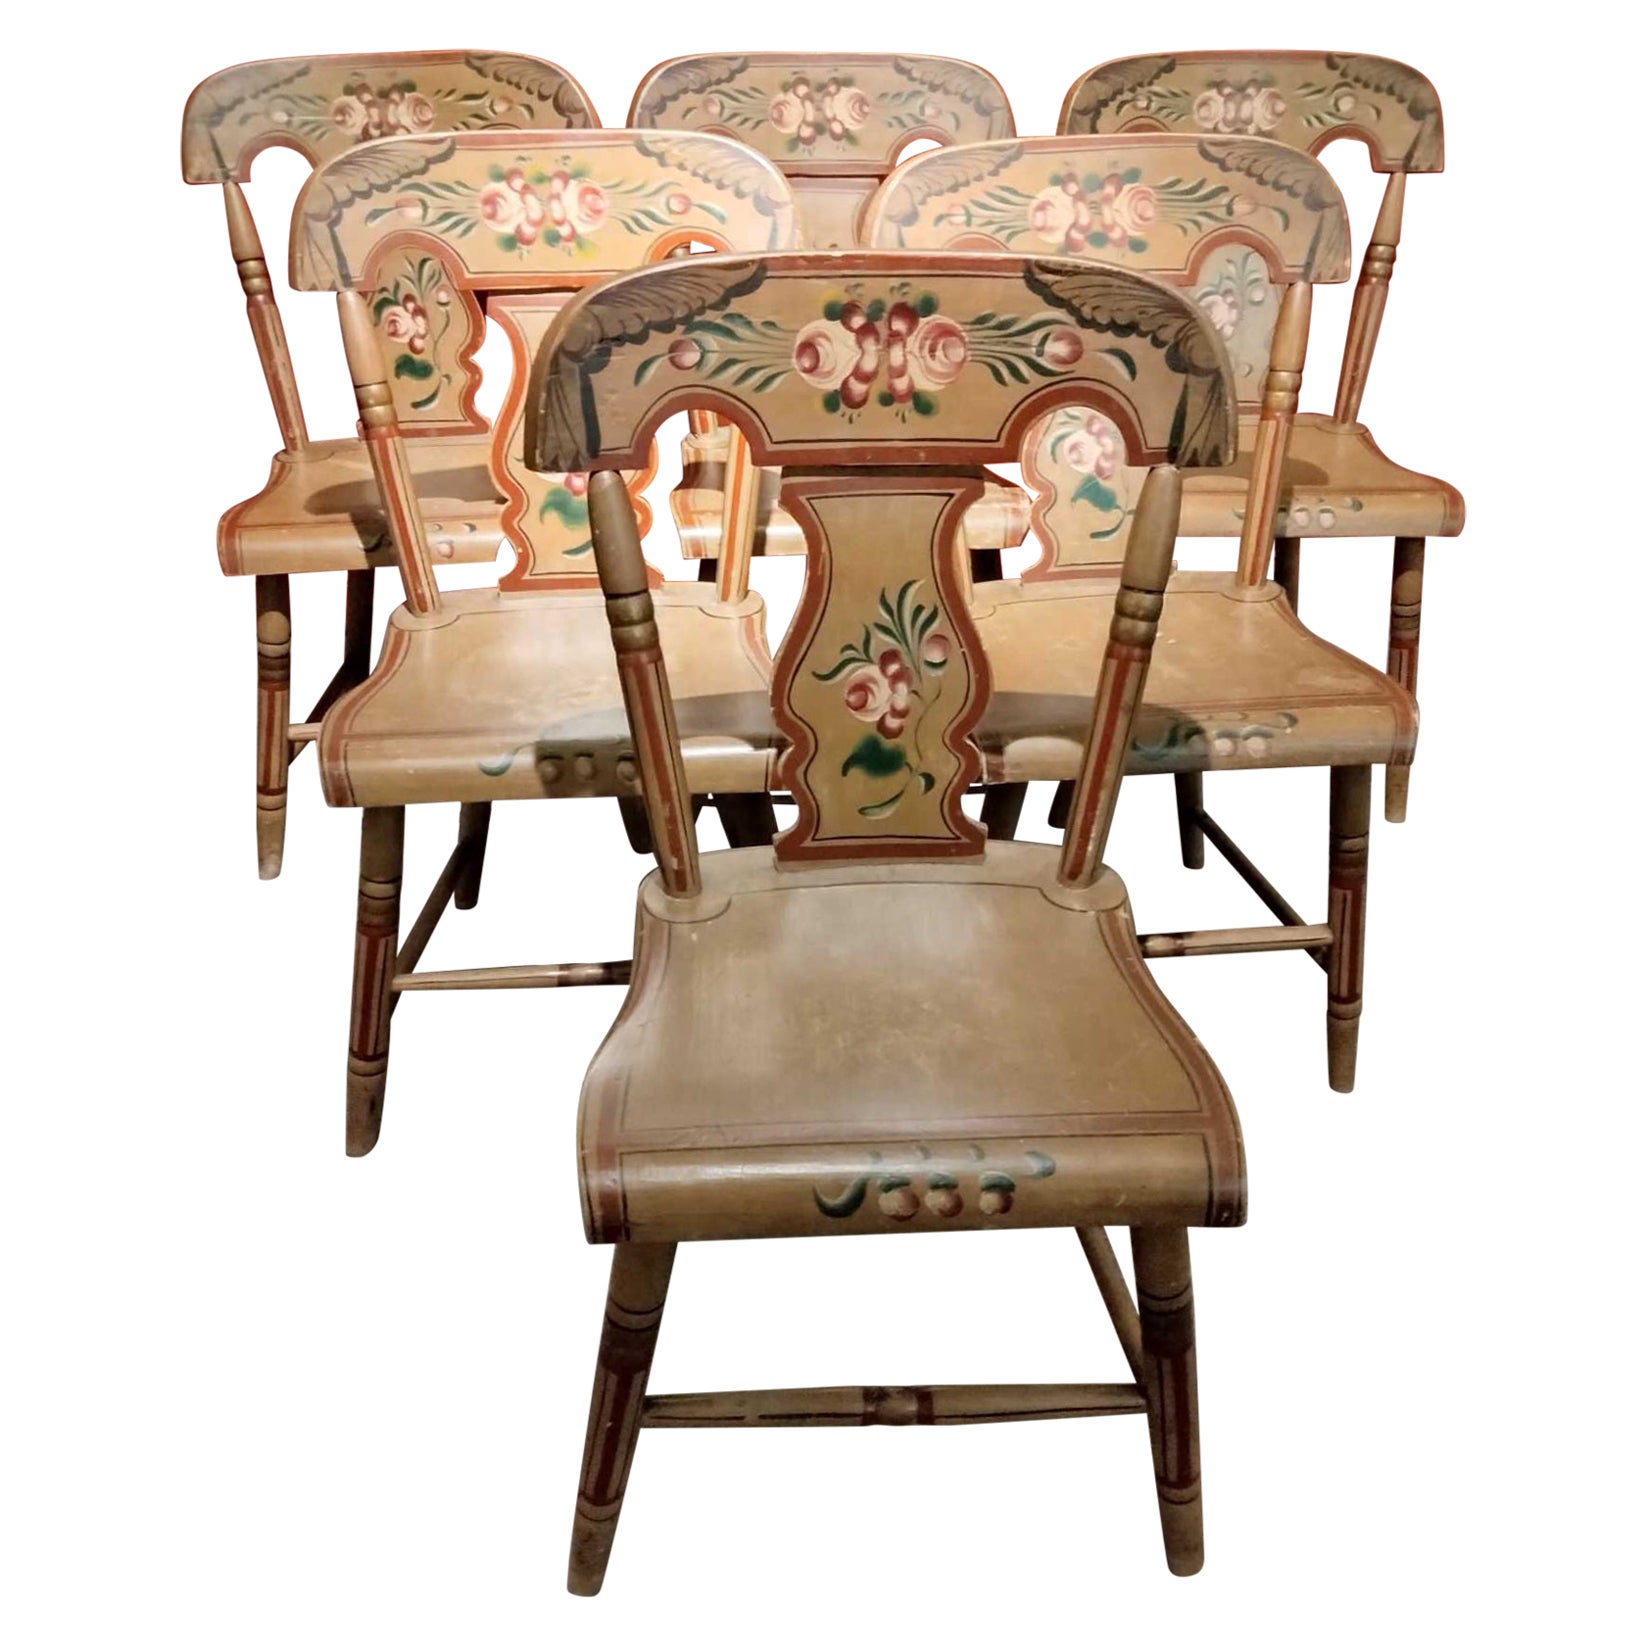 19Thc Original paint  decorated fiddle back plank bottom chairs from Lancaster County ,Pennsylvania. Signed G. Nees made in Manheim,Pennsylvania. These chairs are so comfortable and sturdy. Amazing undisturbed surface and a wonderful patina.